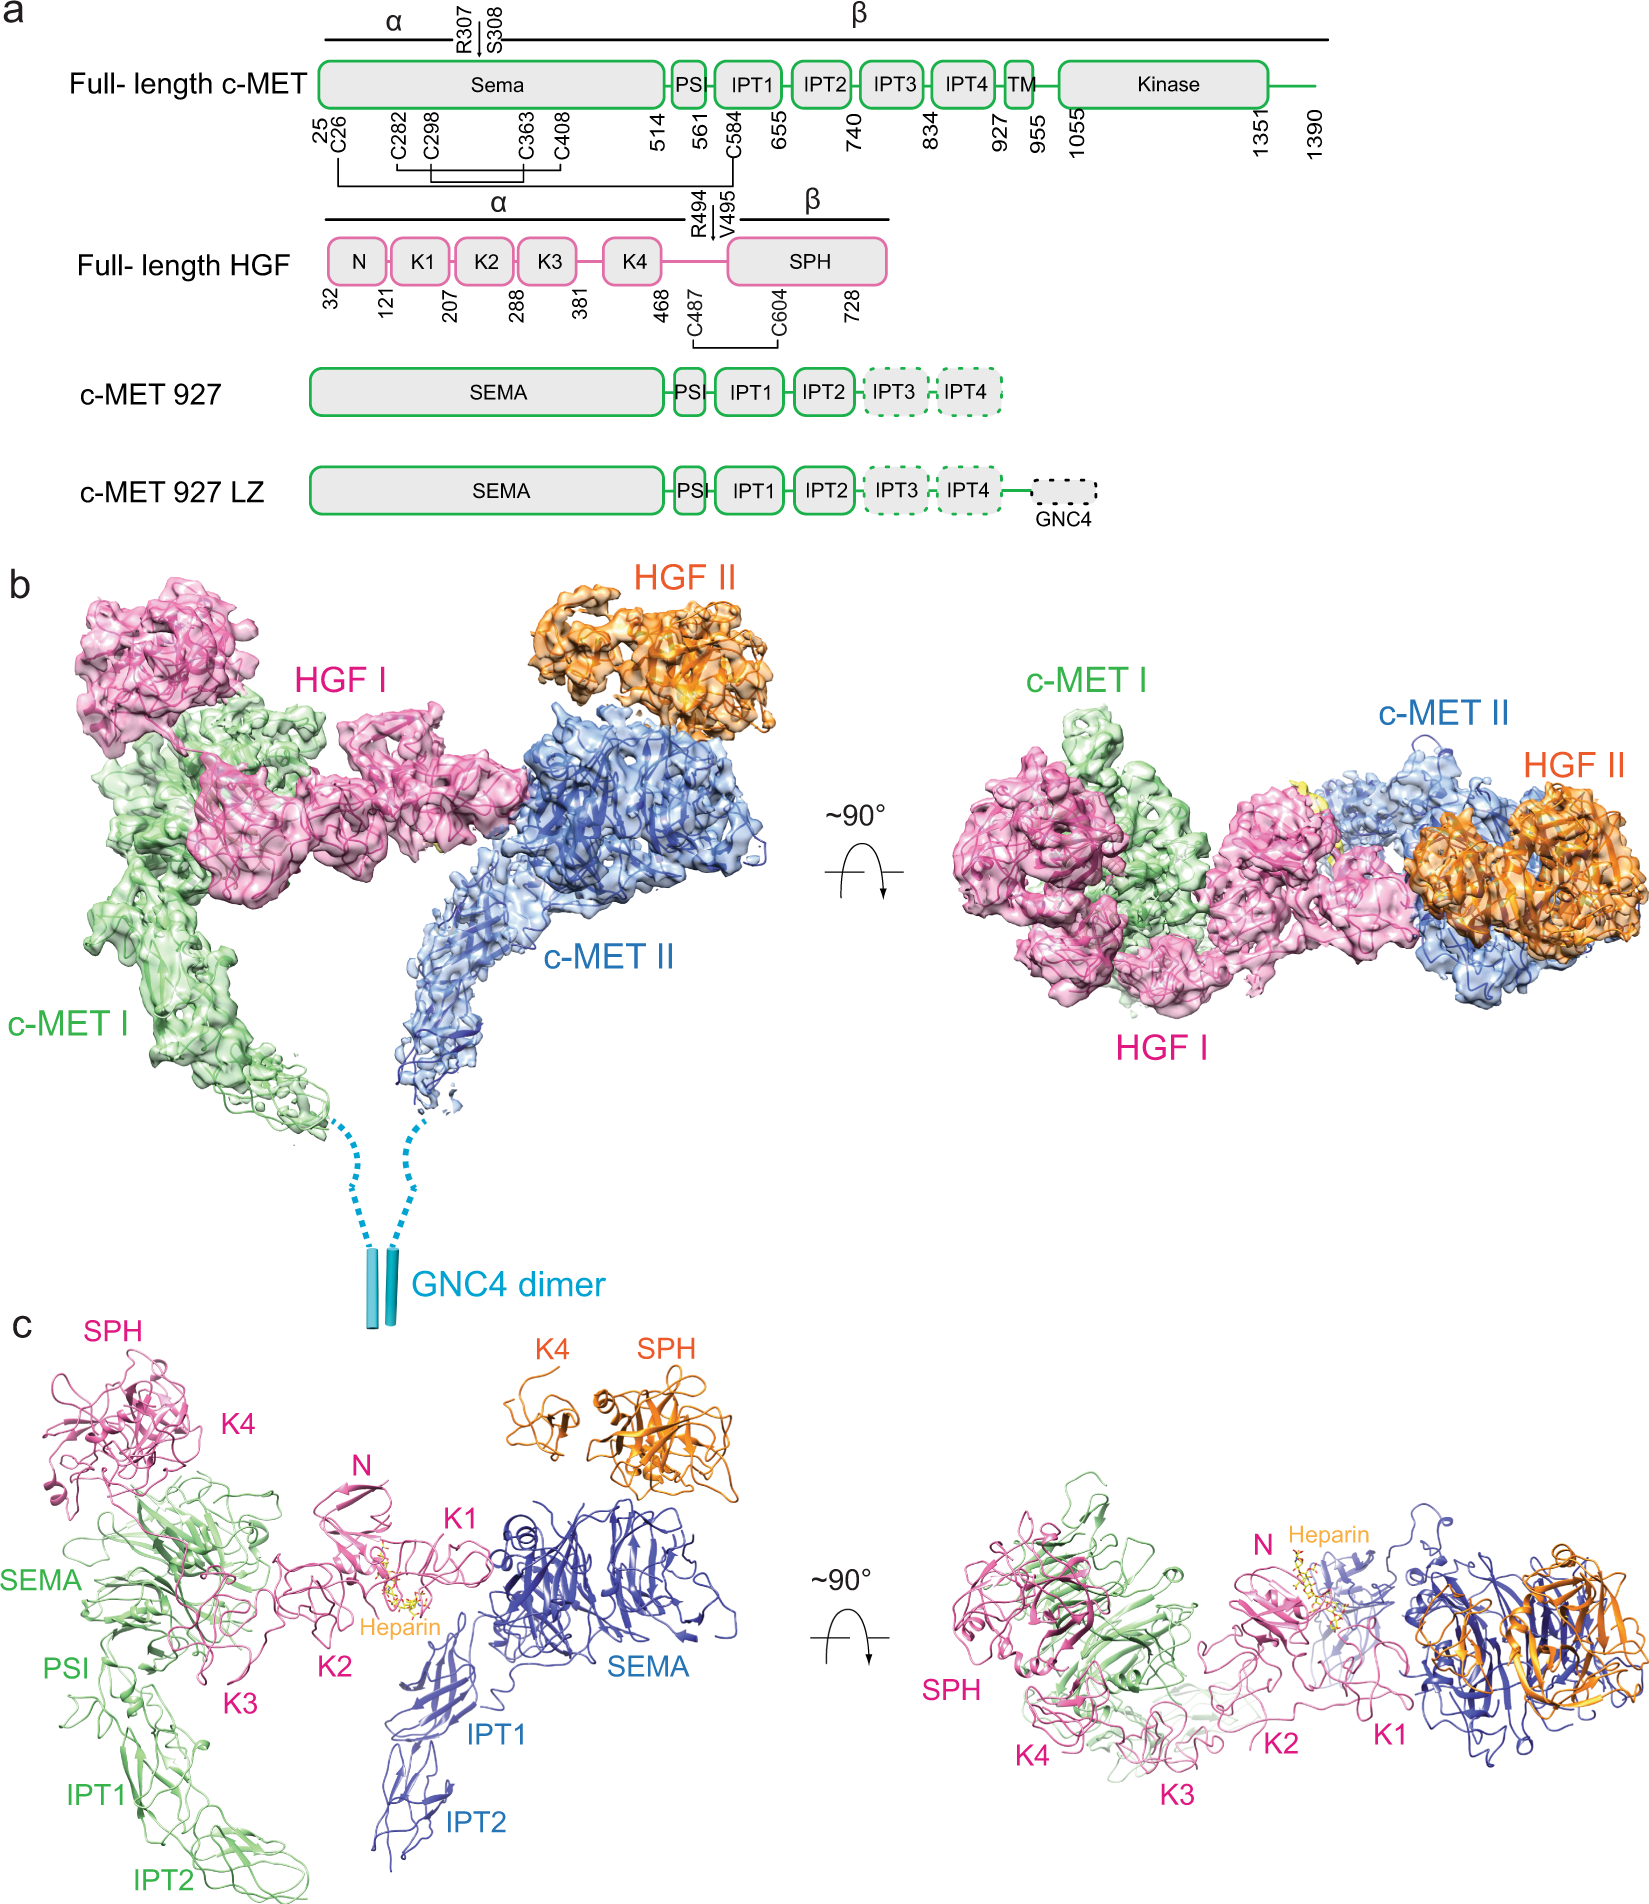 Structural basis of the activation of c-MET receptor